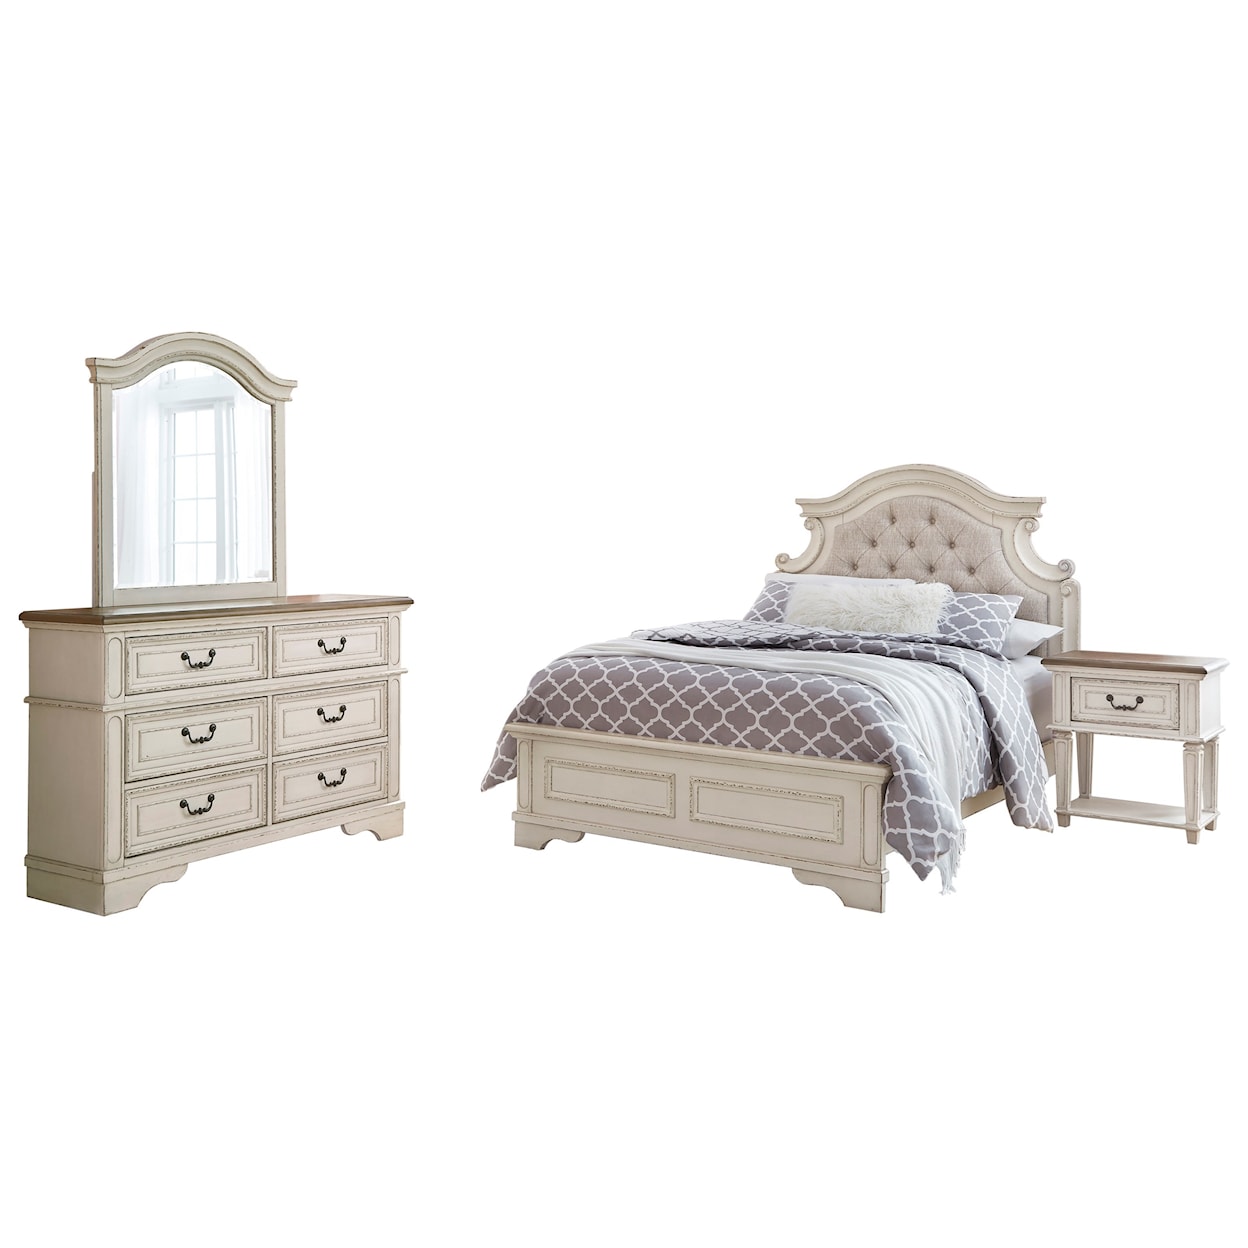 Signature Design by Ashley Realyn Queen Bedroom Group